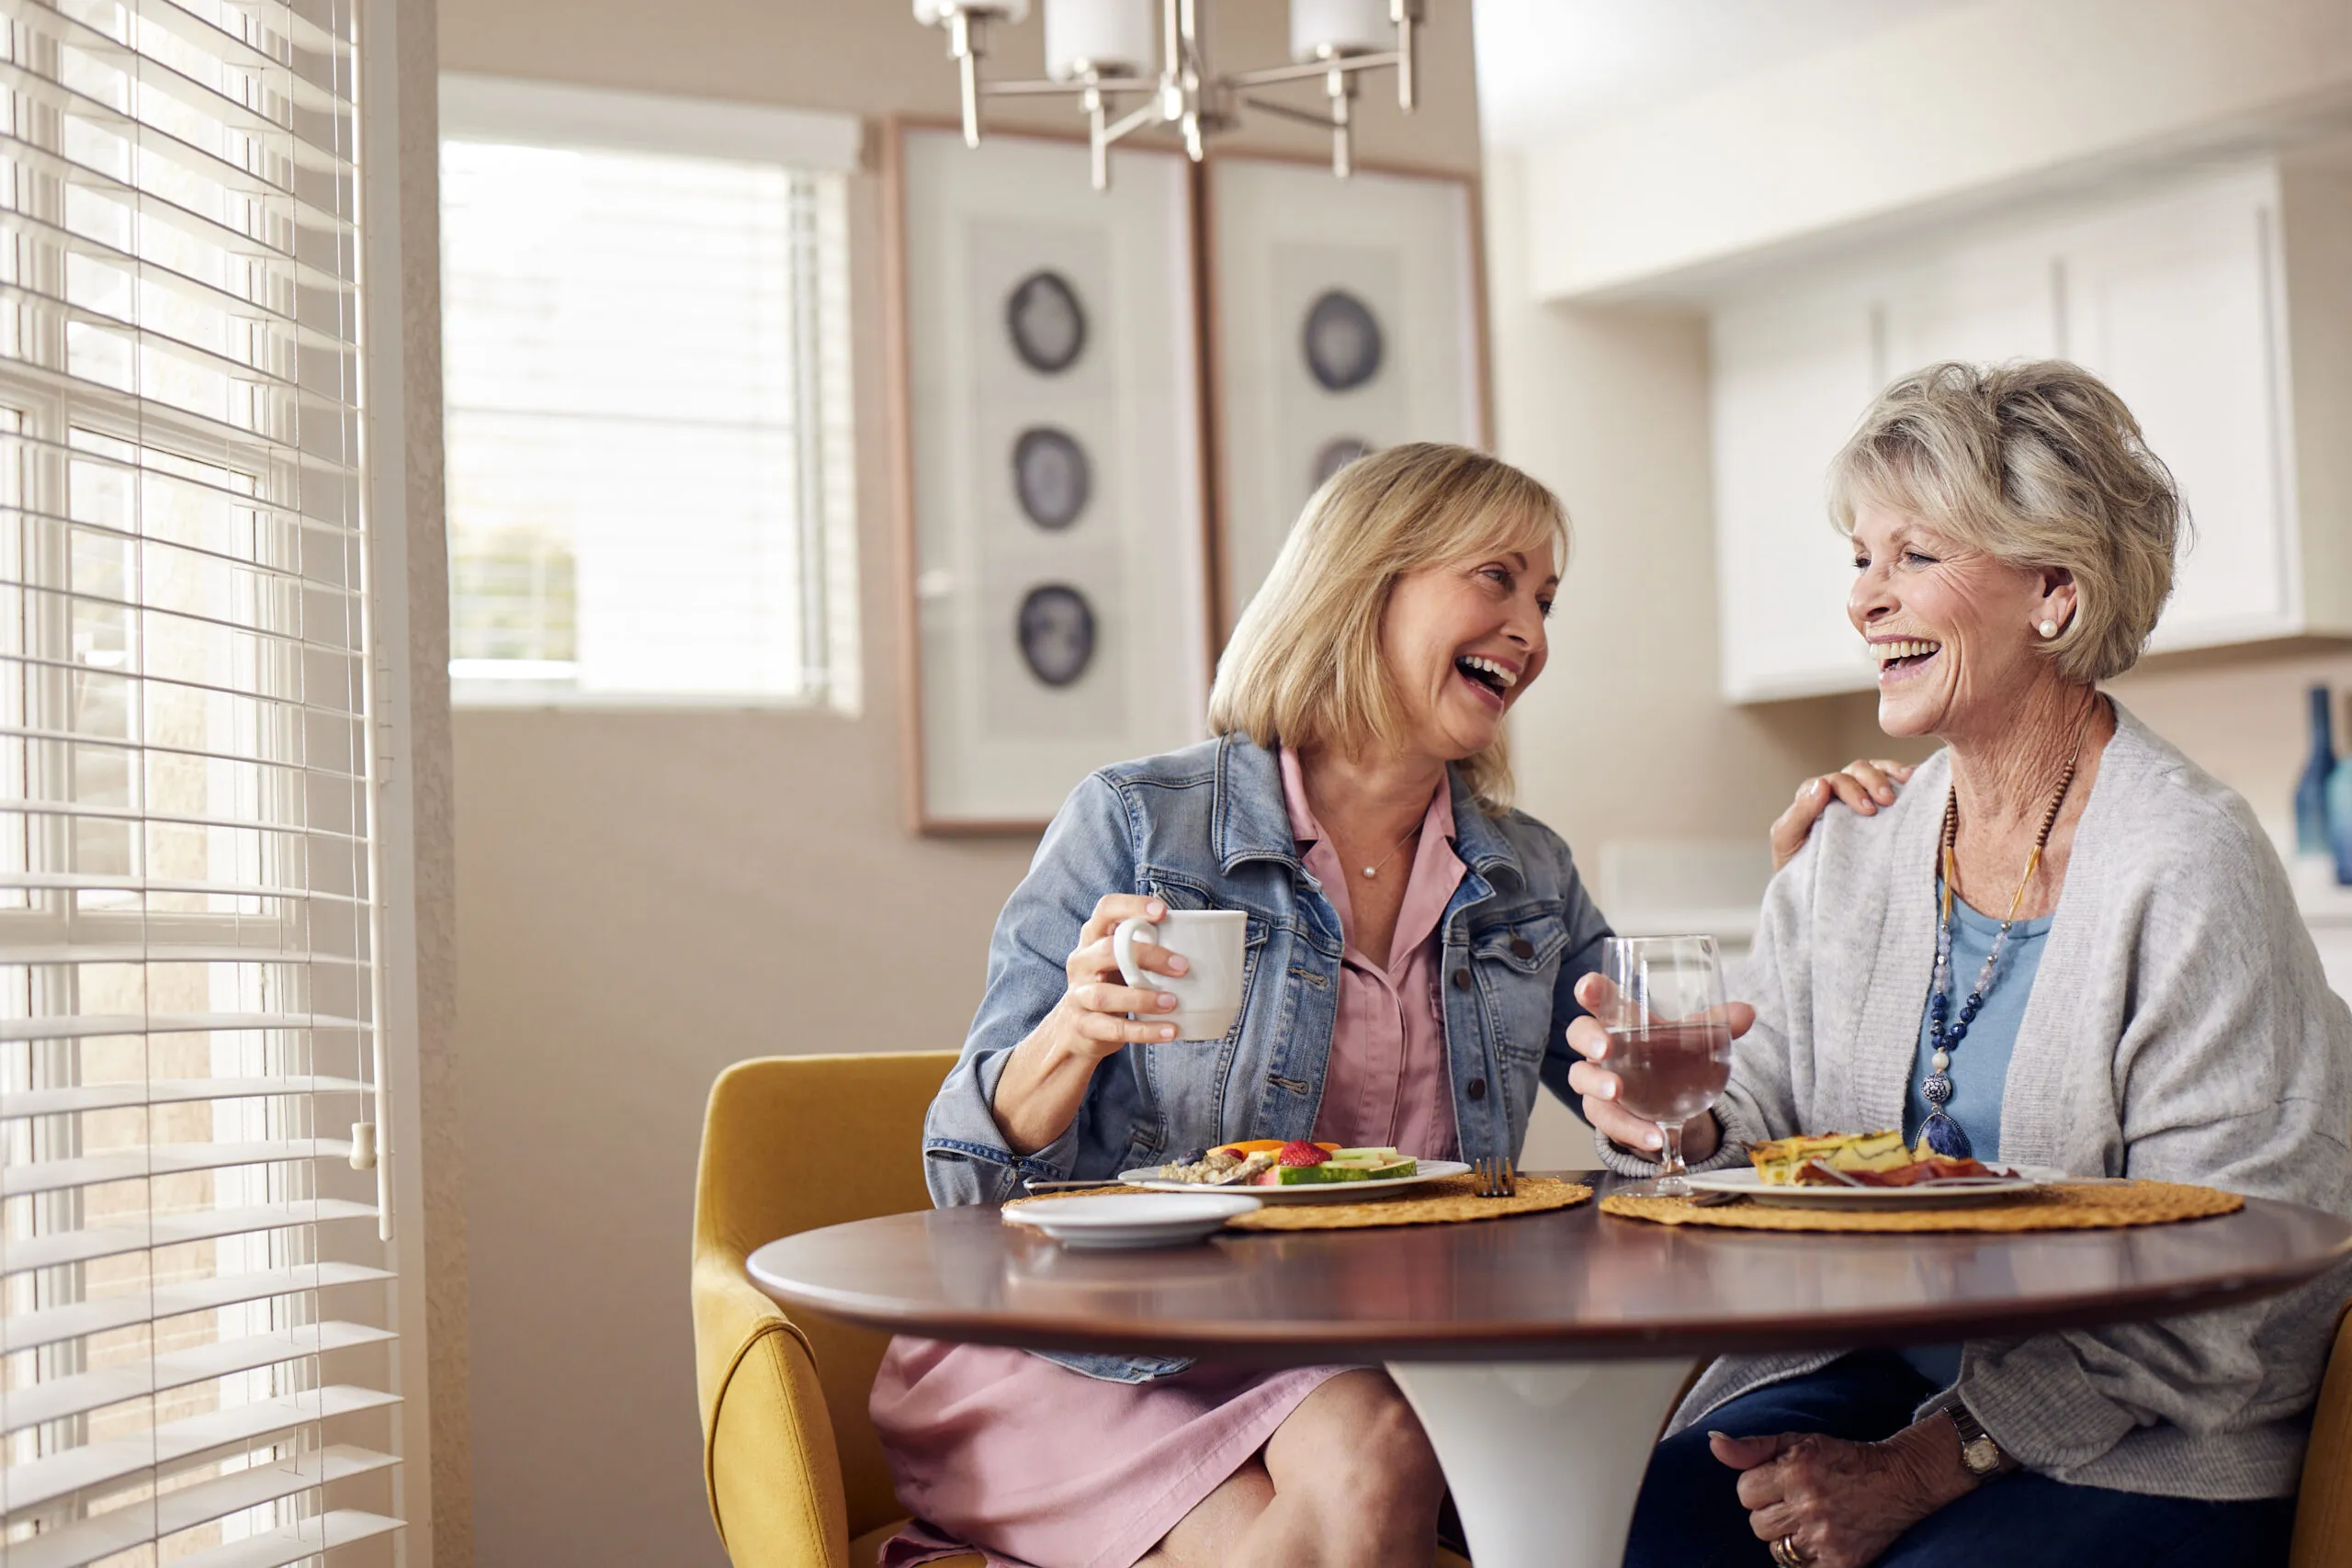 smiling-lady-with-senior-woman-eating-together